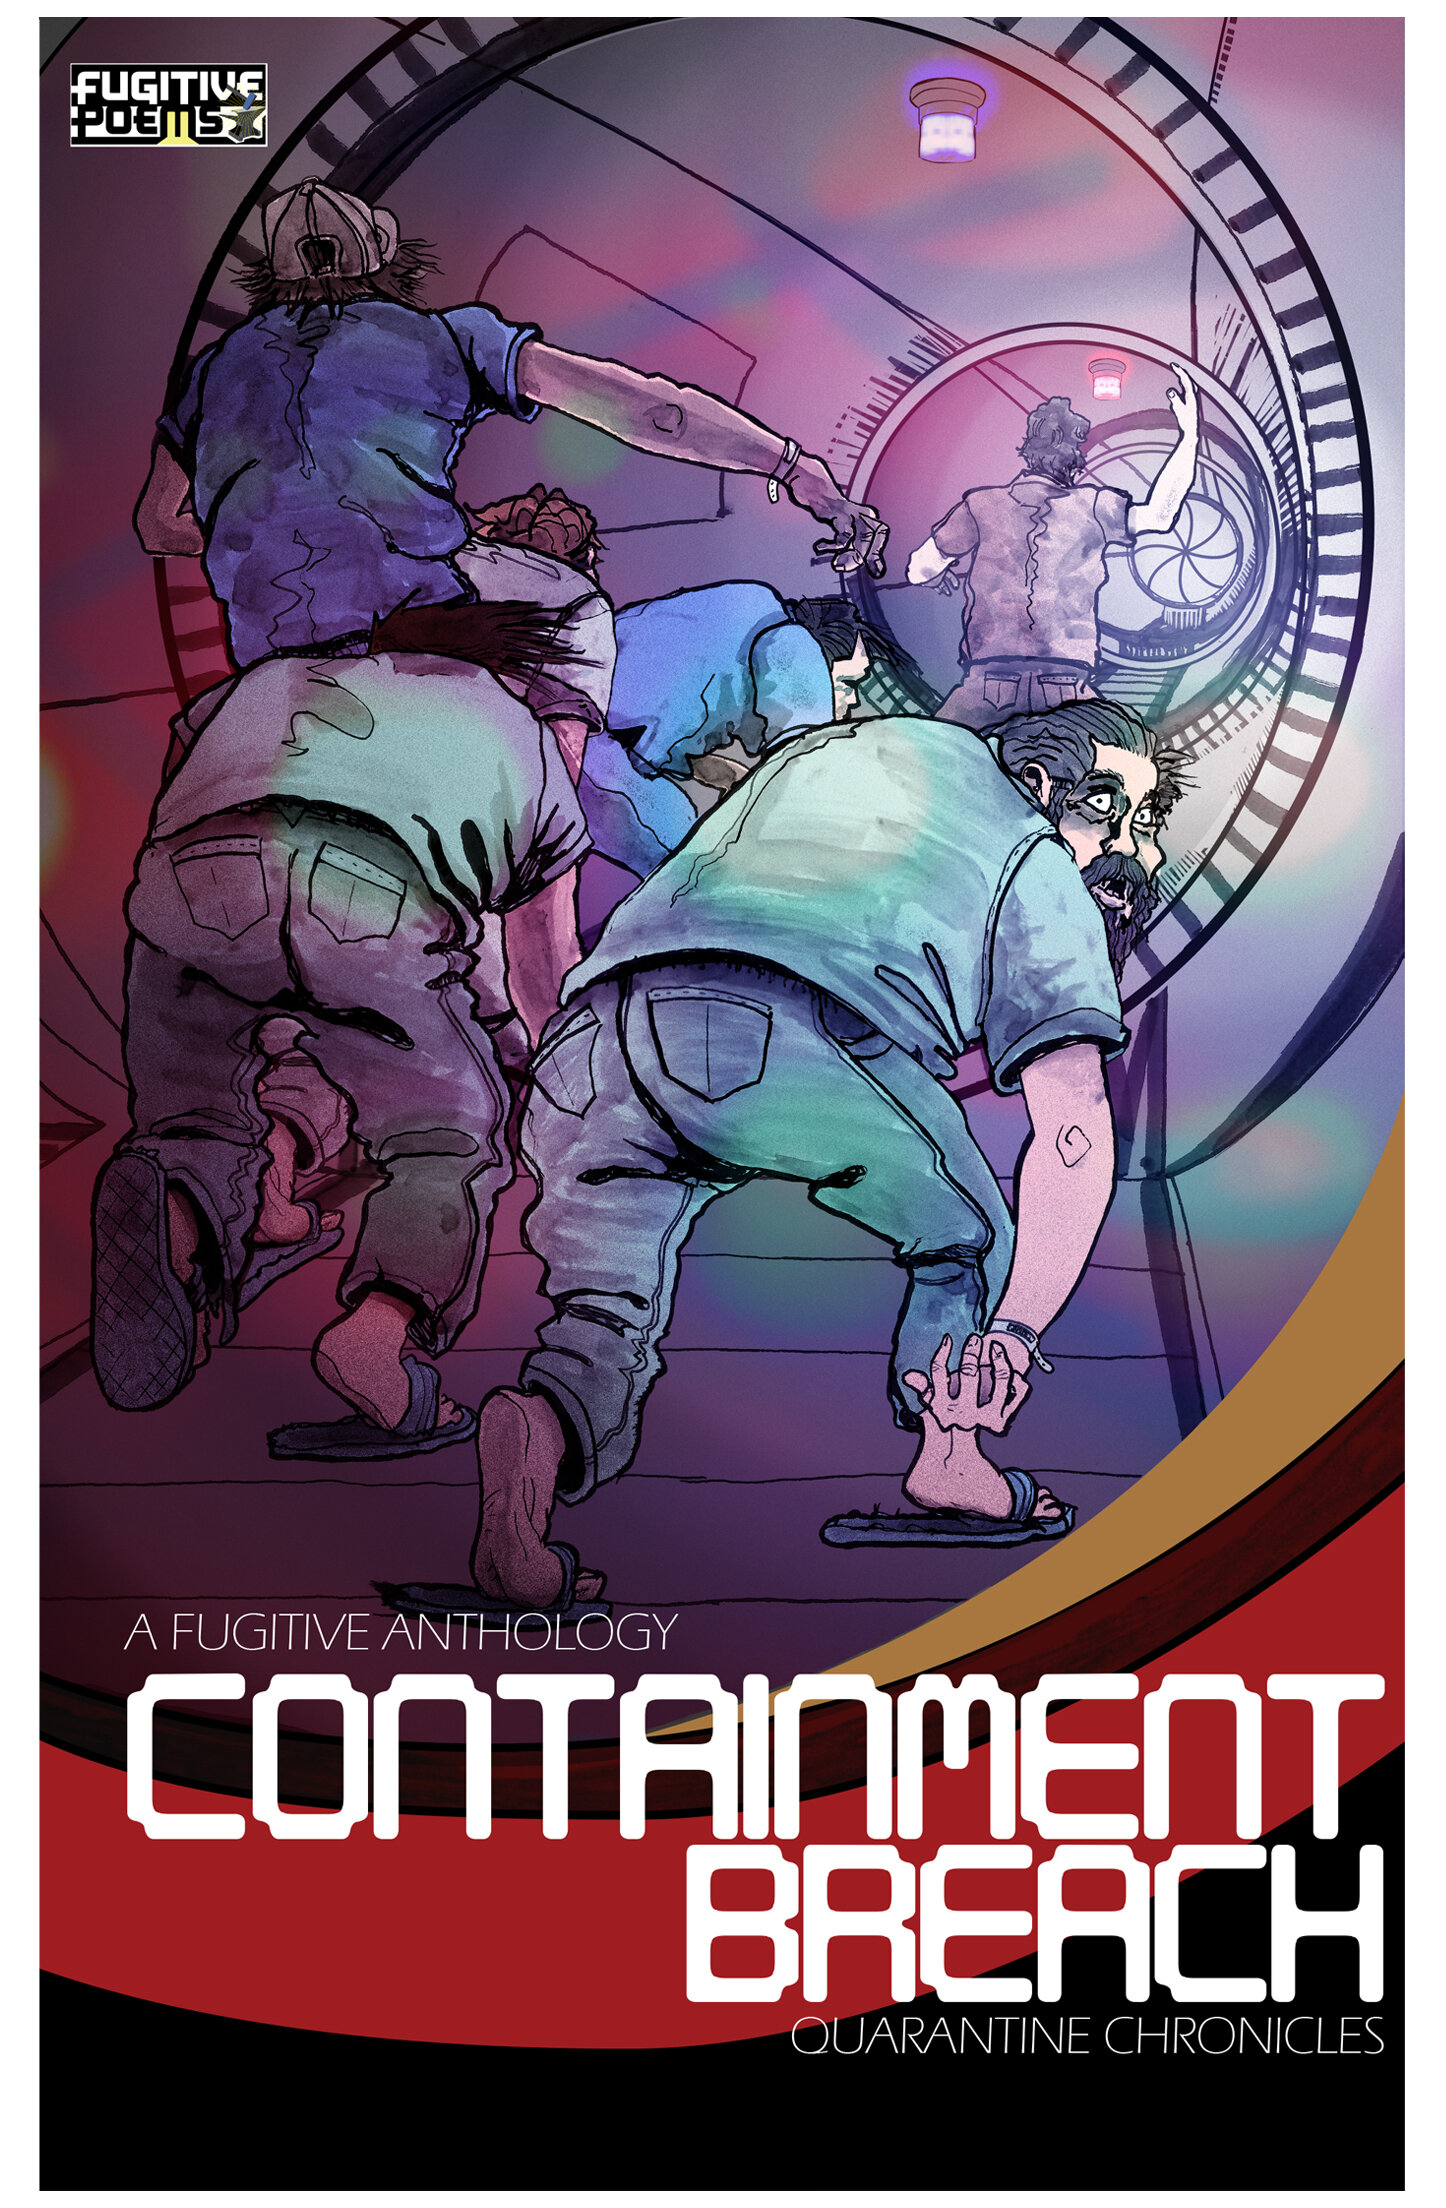 CONTAINMENT BREACH - OUR FIRST ANTHOLOGY